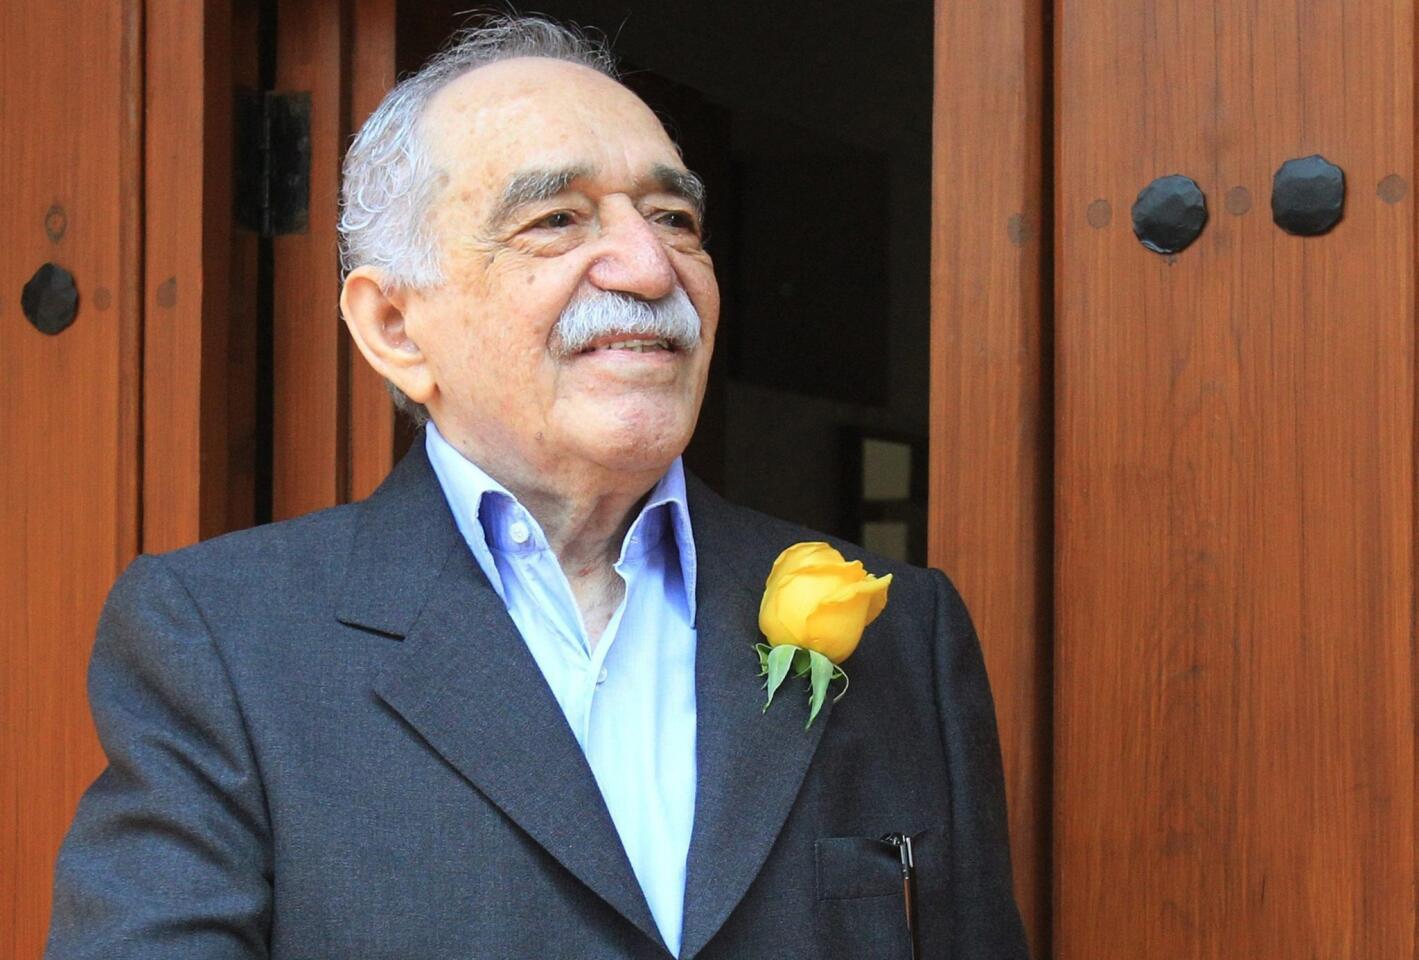 "One Hundred Years of Solitude," by Colombian writer and Nobel Prize in literature recipient Gabriel Garcia Marquez, popularized the emerging Latin American literary genre known as magic realism.